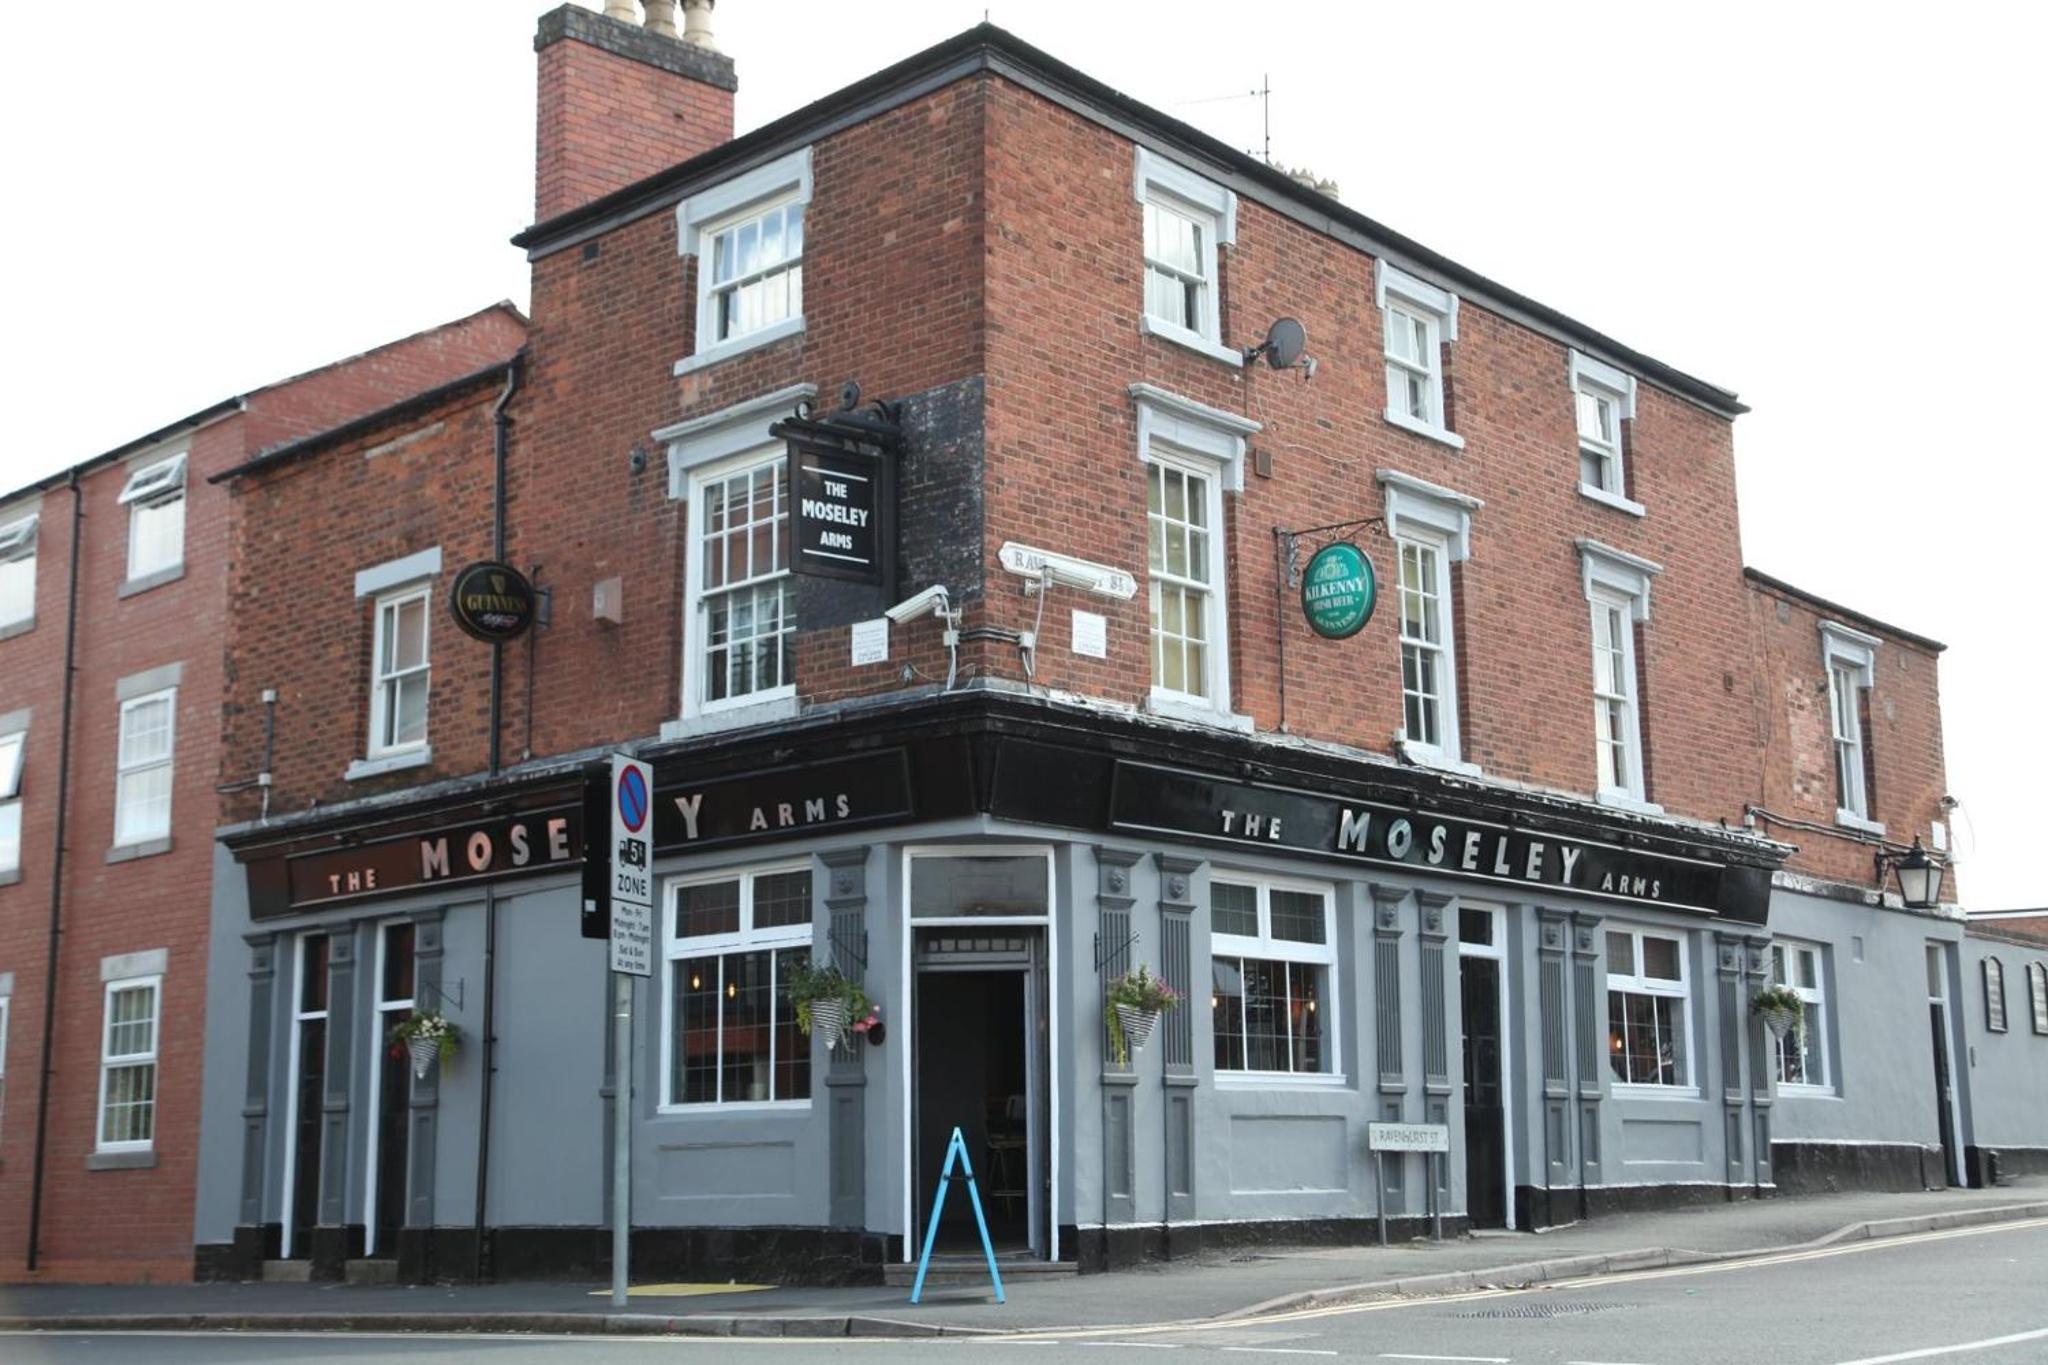 The Moseley Arms Hotel